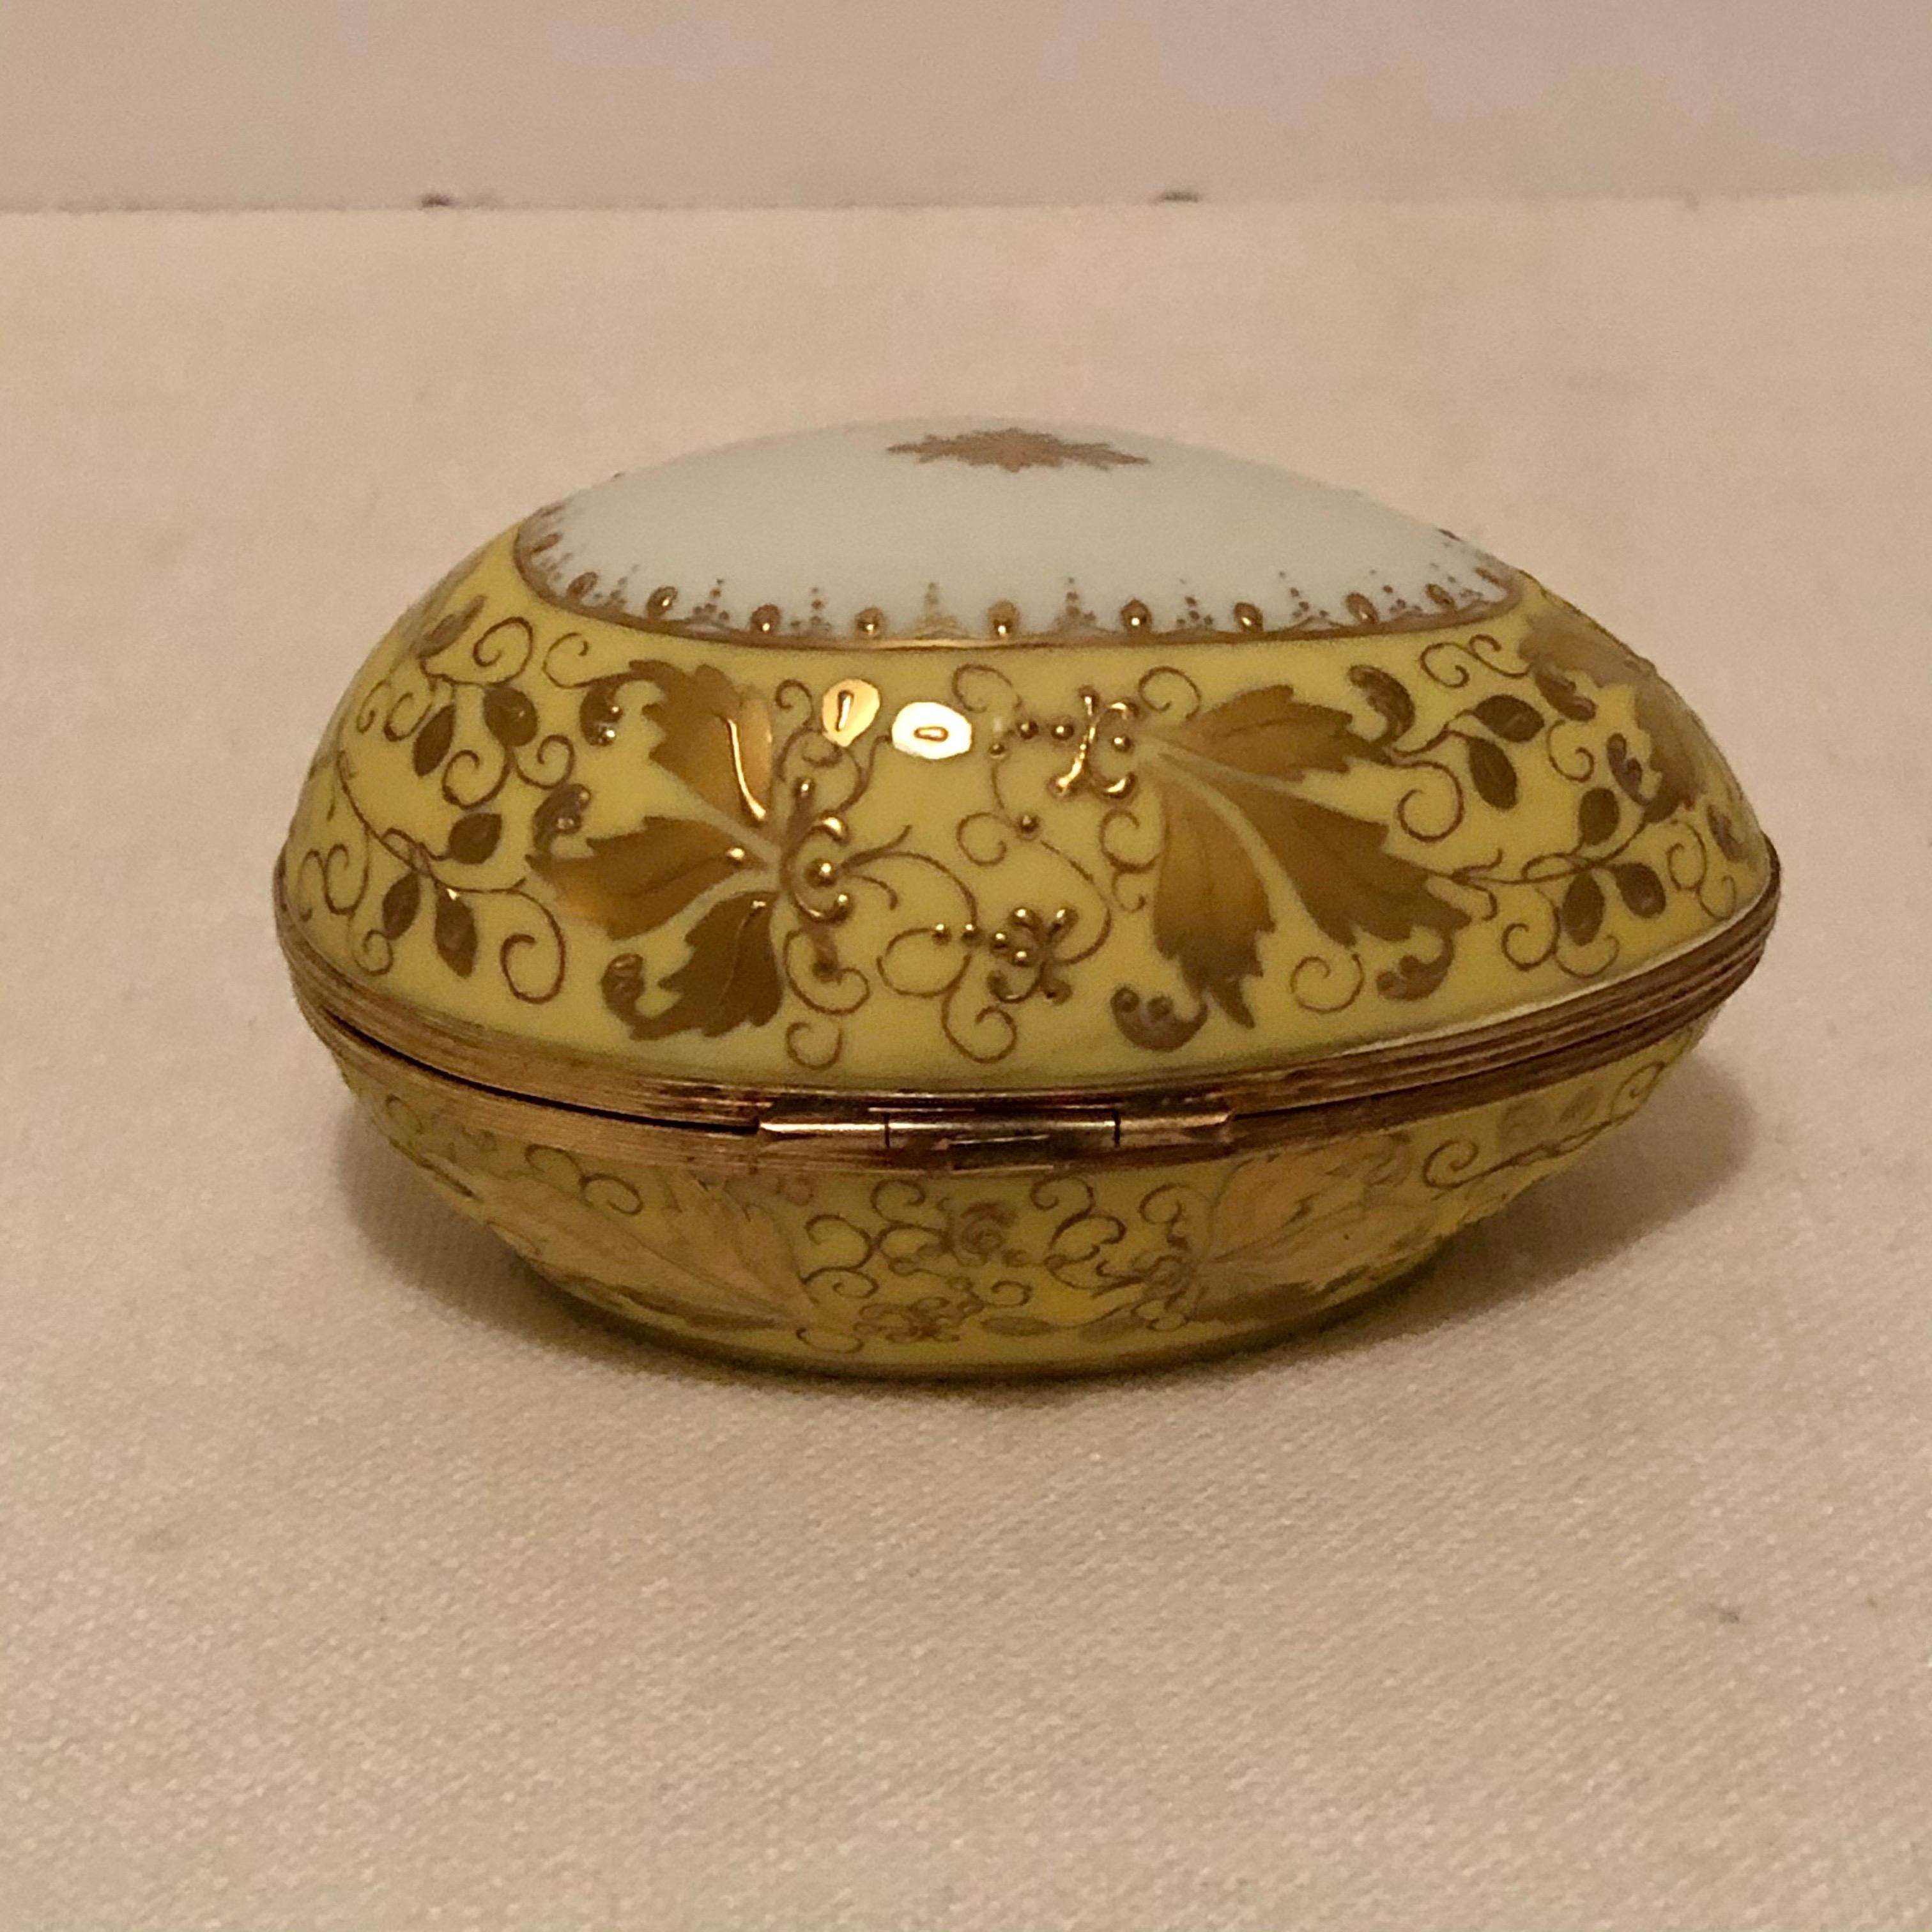 Le Tallec Porcelain Egg Shaped Box Decorated with Exquisite Raised Gilding 1